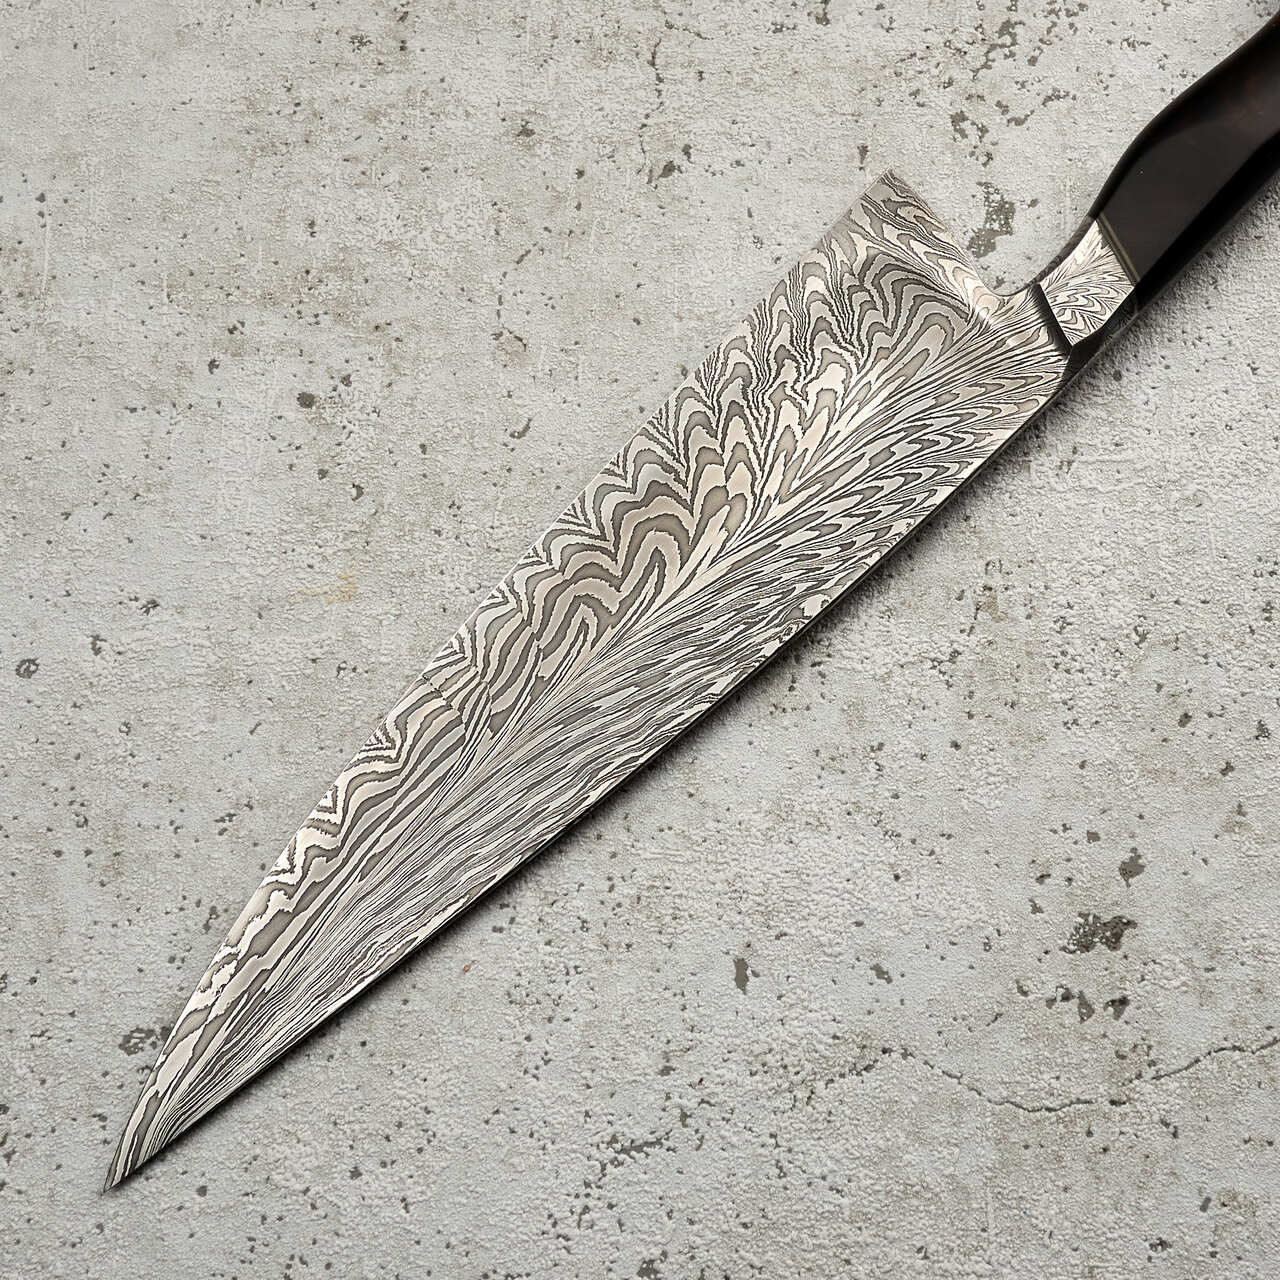 Martin Huber Chef Knife 220mm Feather Damascus "S" Grind with Integral Ironwood Handle - Profile